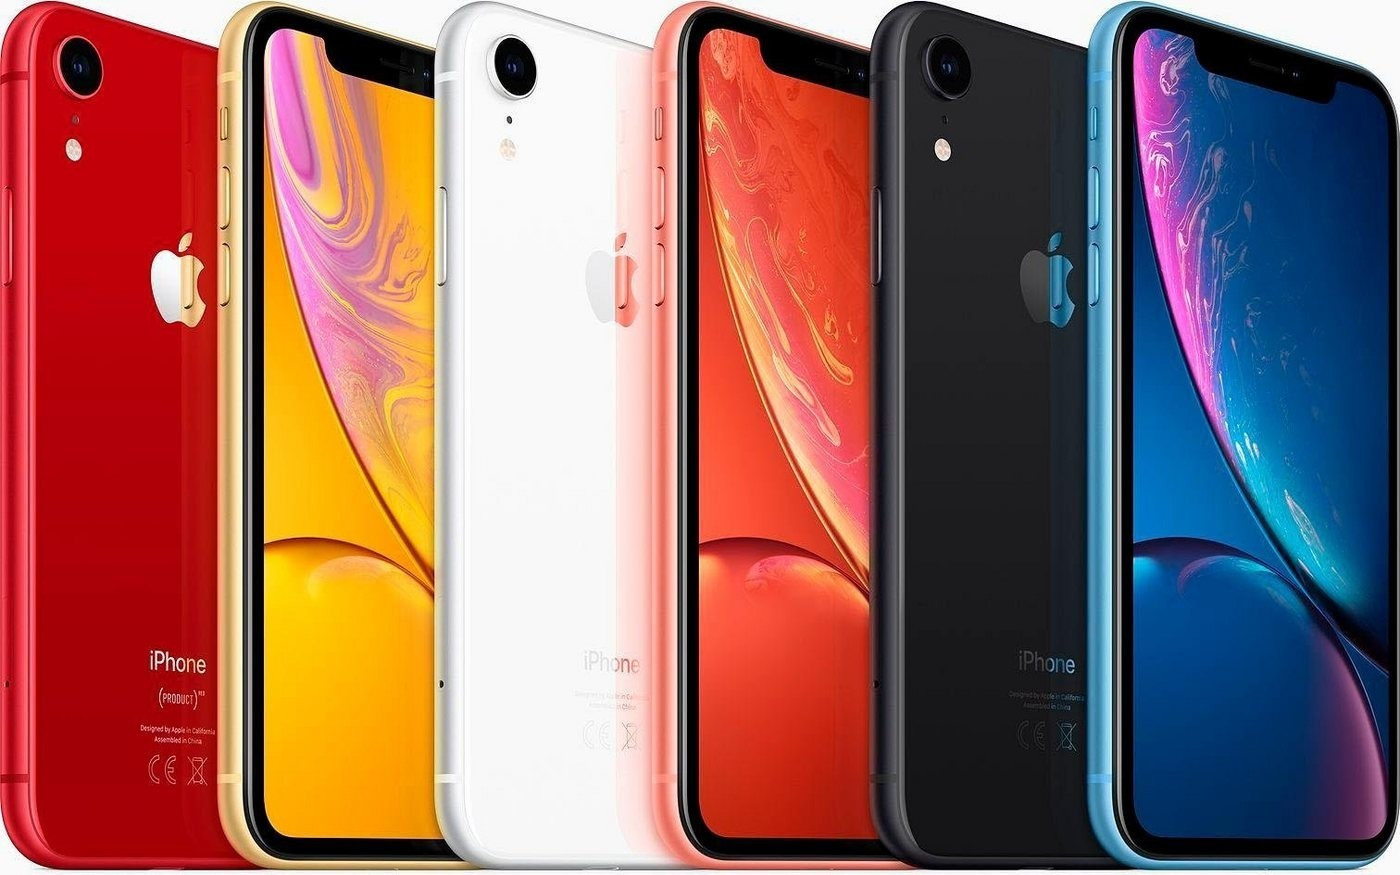 Buy Apple iPhone XR 64GB Blue from £281.48 (Today) – Best Black Friday